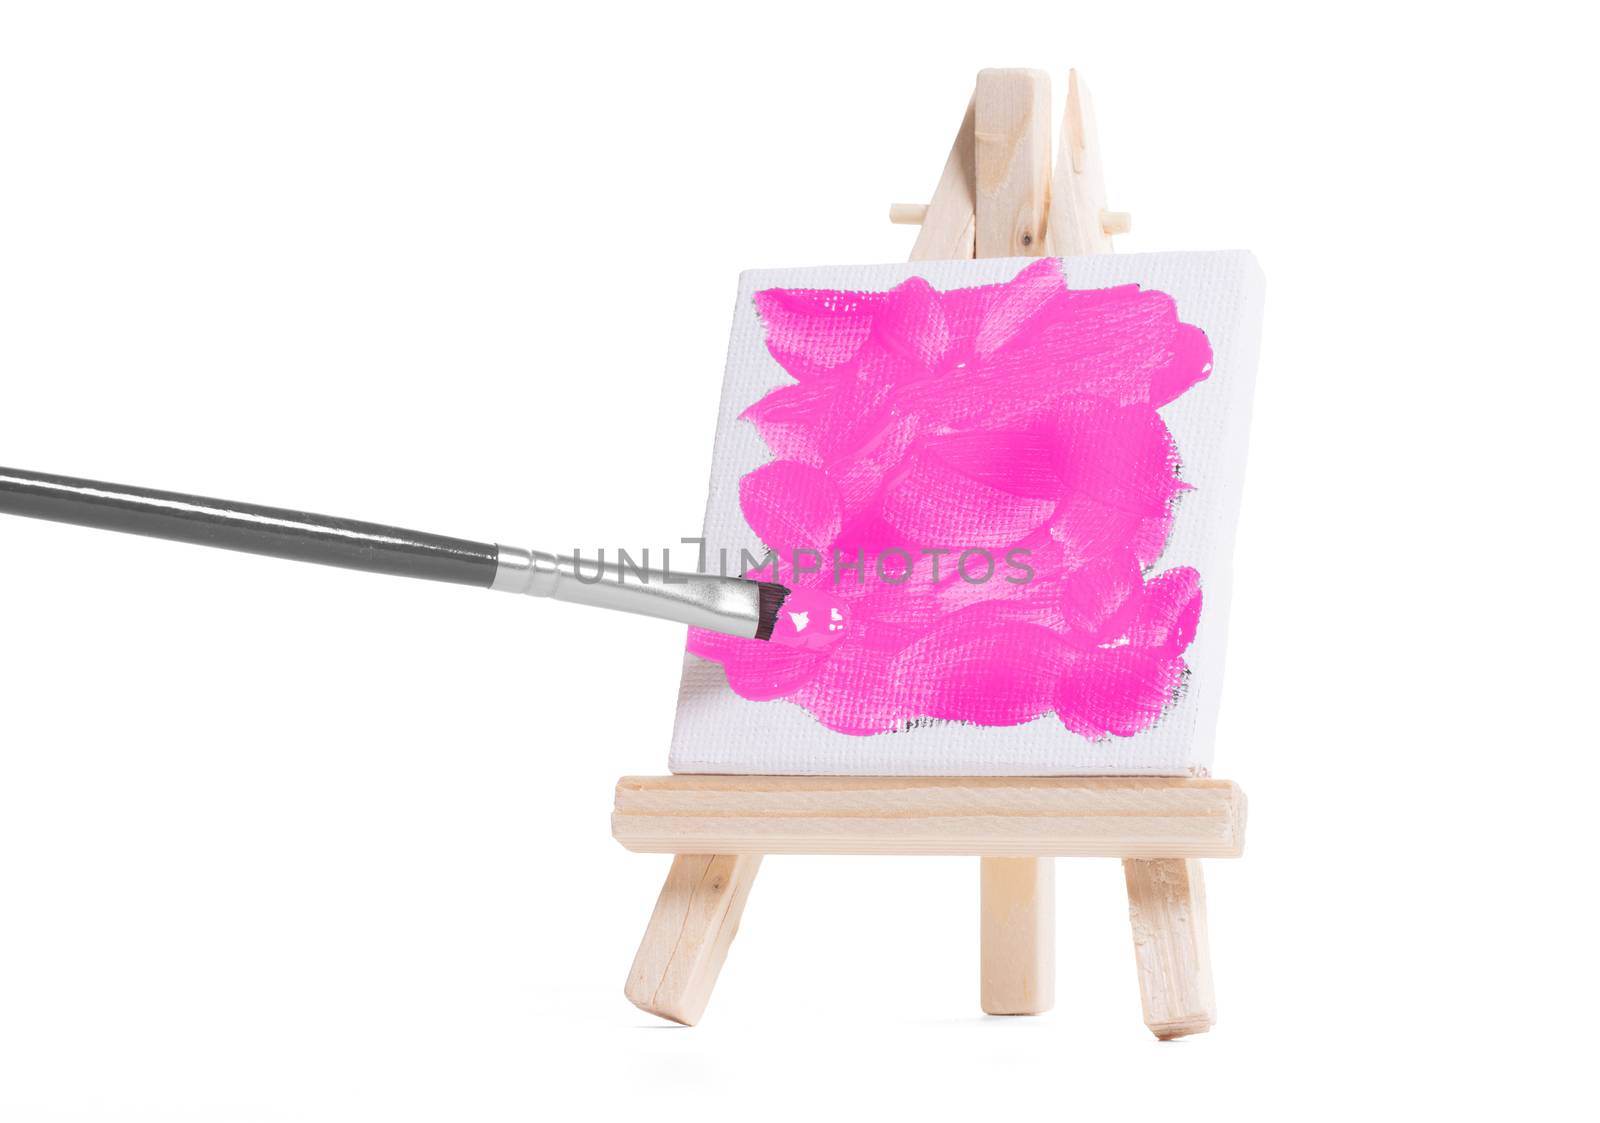 Miniature tripod for painting, painting in pink